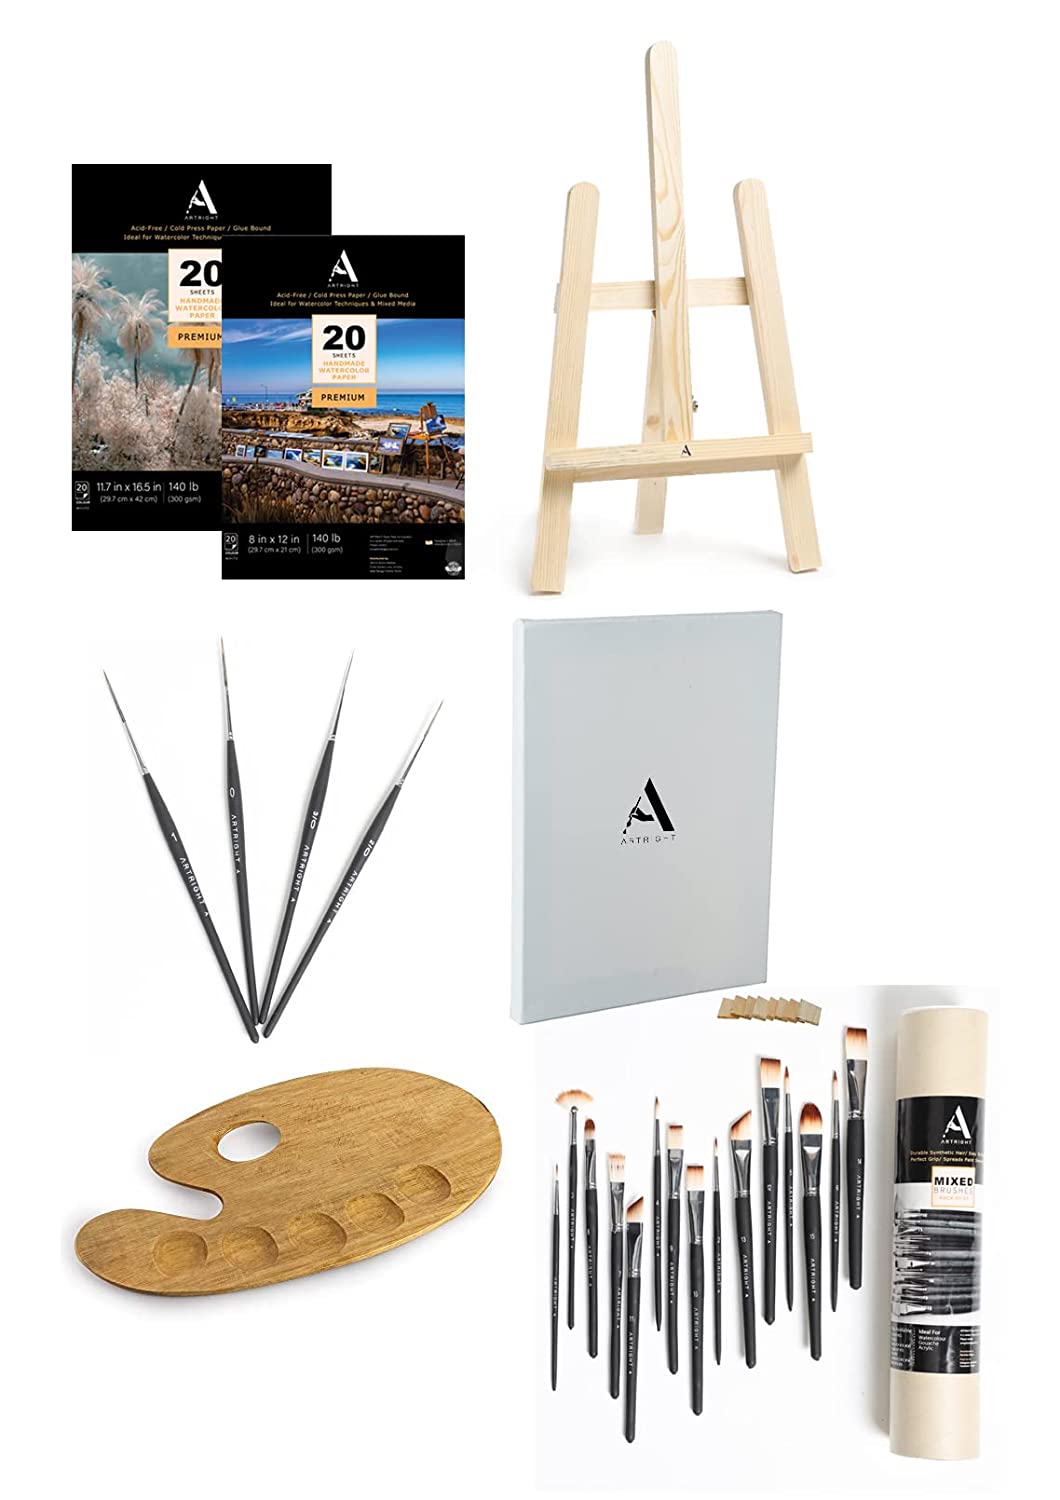 Mega Painting Set Combo for Artists' - 60 Pcs Professional Painting & Art Supply Kit with Wooden Easel (2 Feet), A3 Pre Stretched Canvas, 40 A3 & A4 Watercolor Sheets (300 GSM), Painting Palette, Mix Paintbrush Set of 19 with 4 Free Liner Brushes